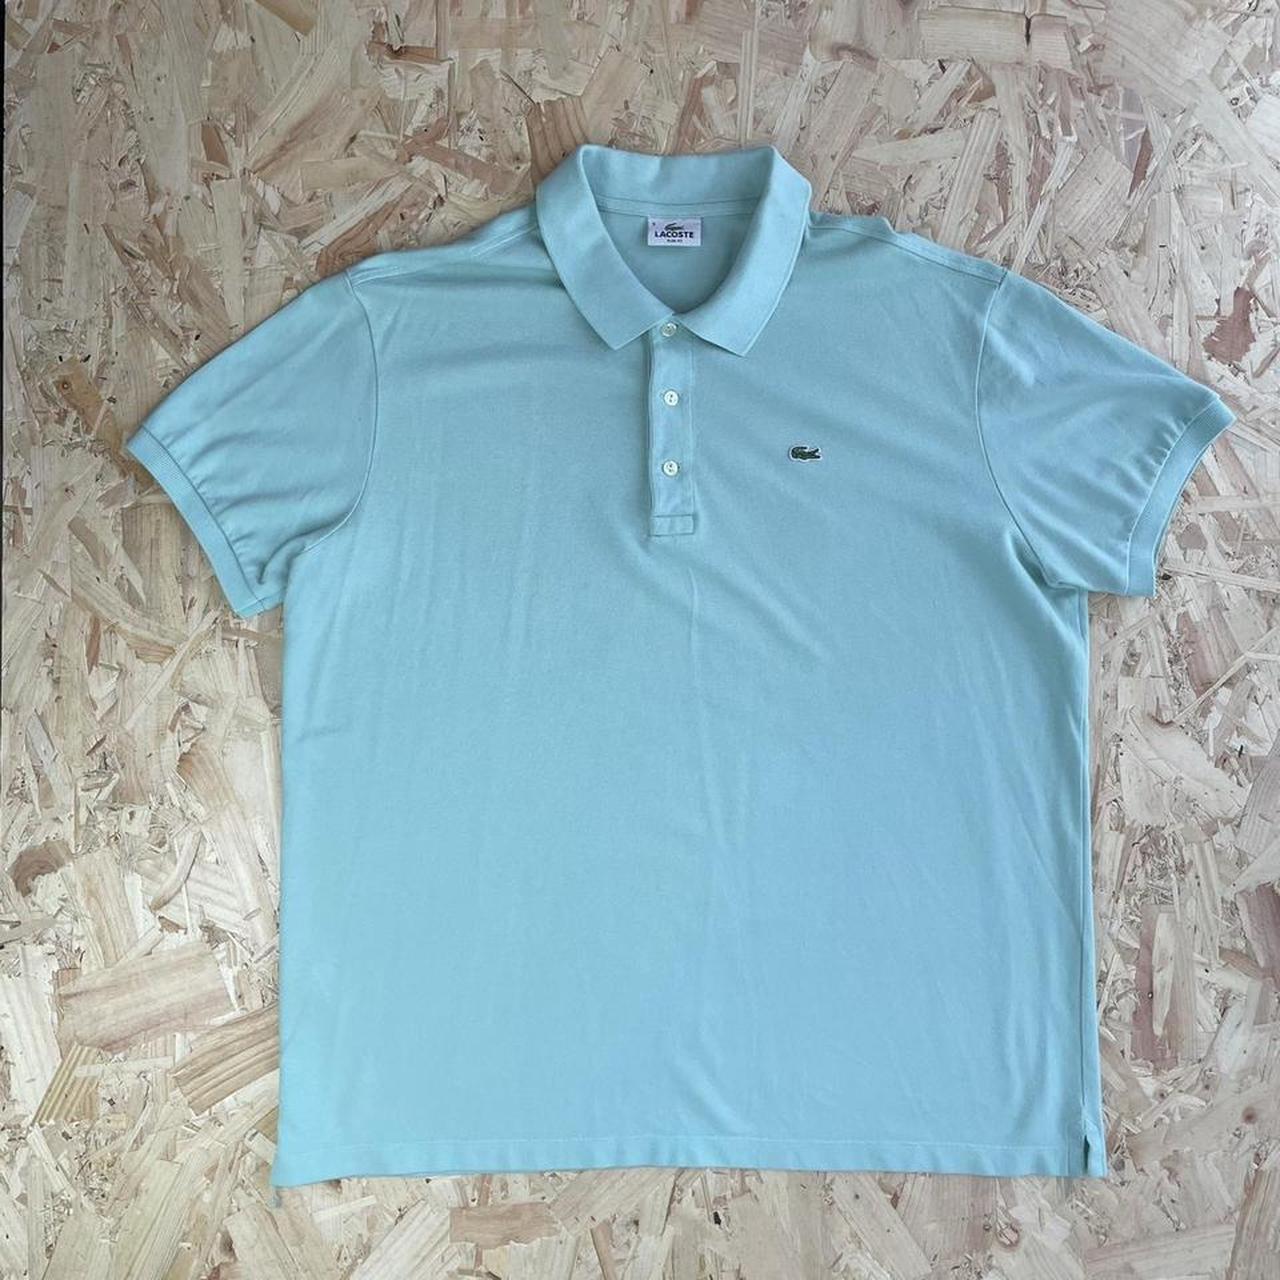 Classic Lacoste Mint Green Polo Shirt size on... - Depop